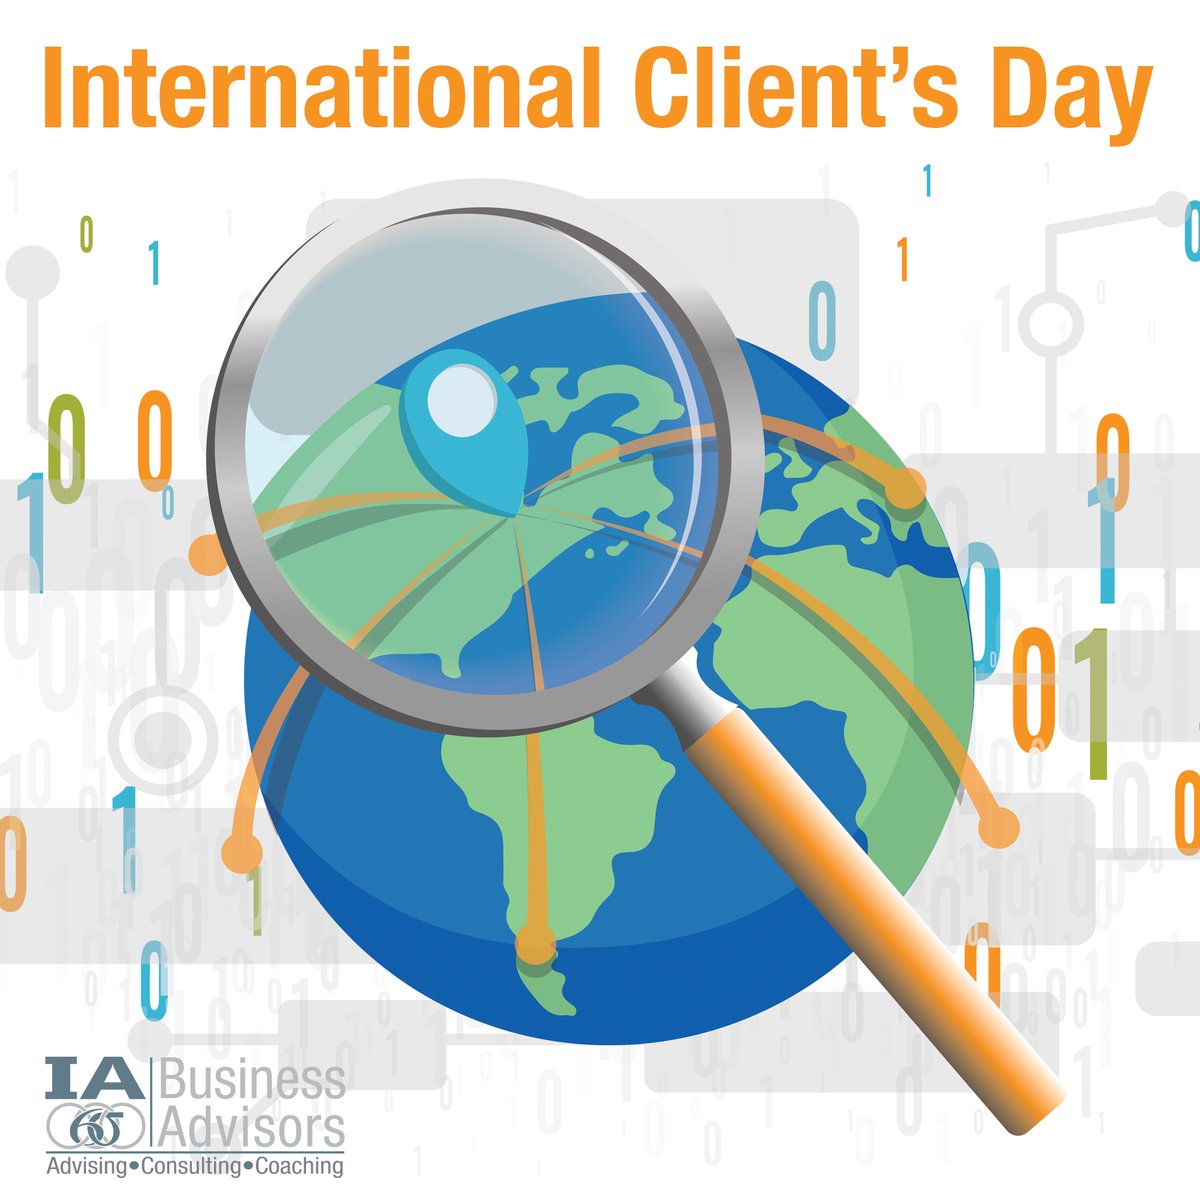 At IA, our team has helped clients solve business problems on all seven continents, even Antarctica! No matter where you are in the world, our team is ready to support you!
#InternationalClientsDay#IABusinessAdvisors #TeamIA